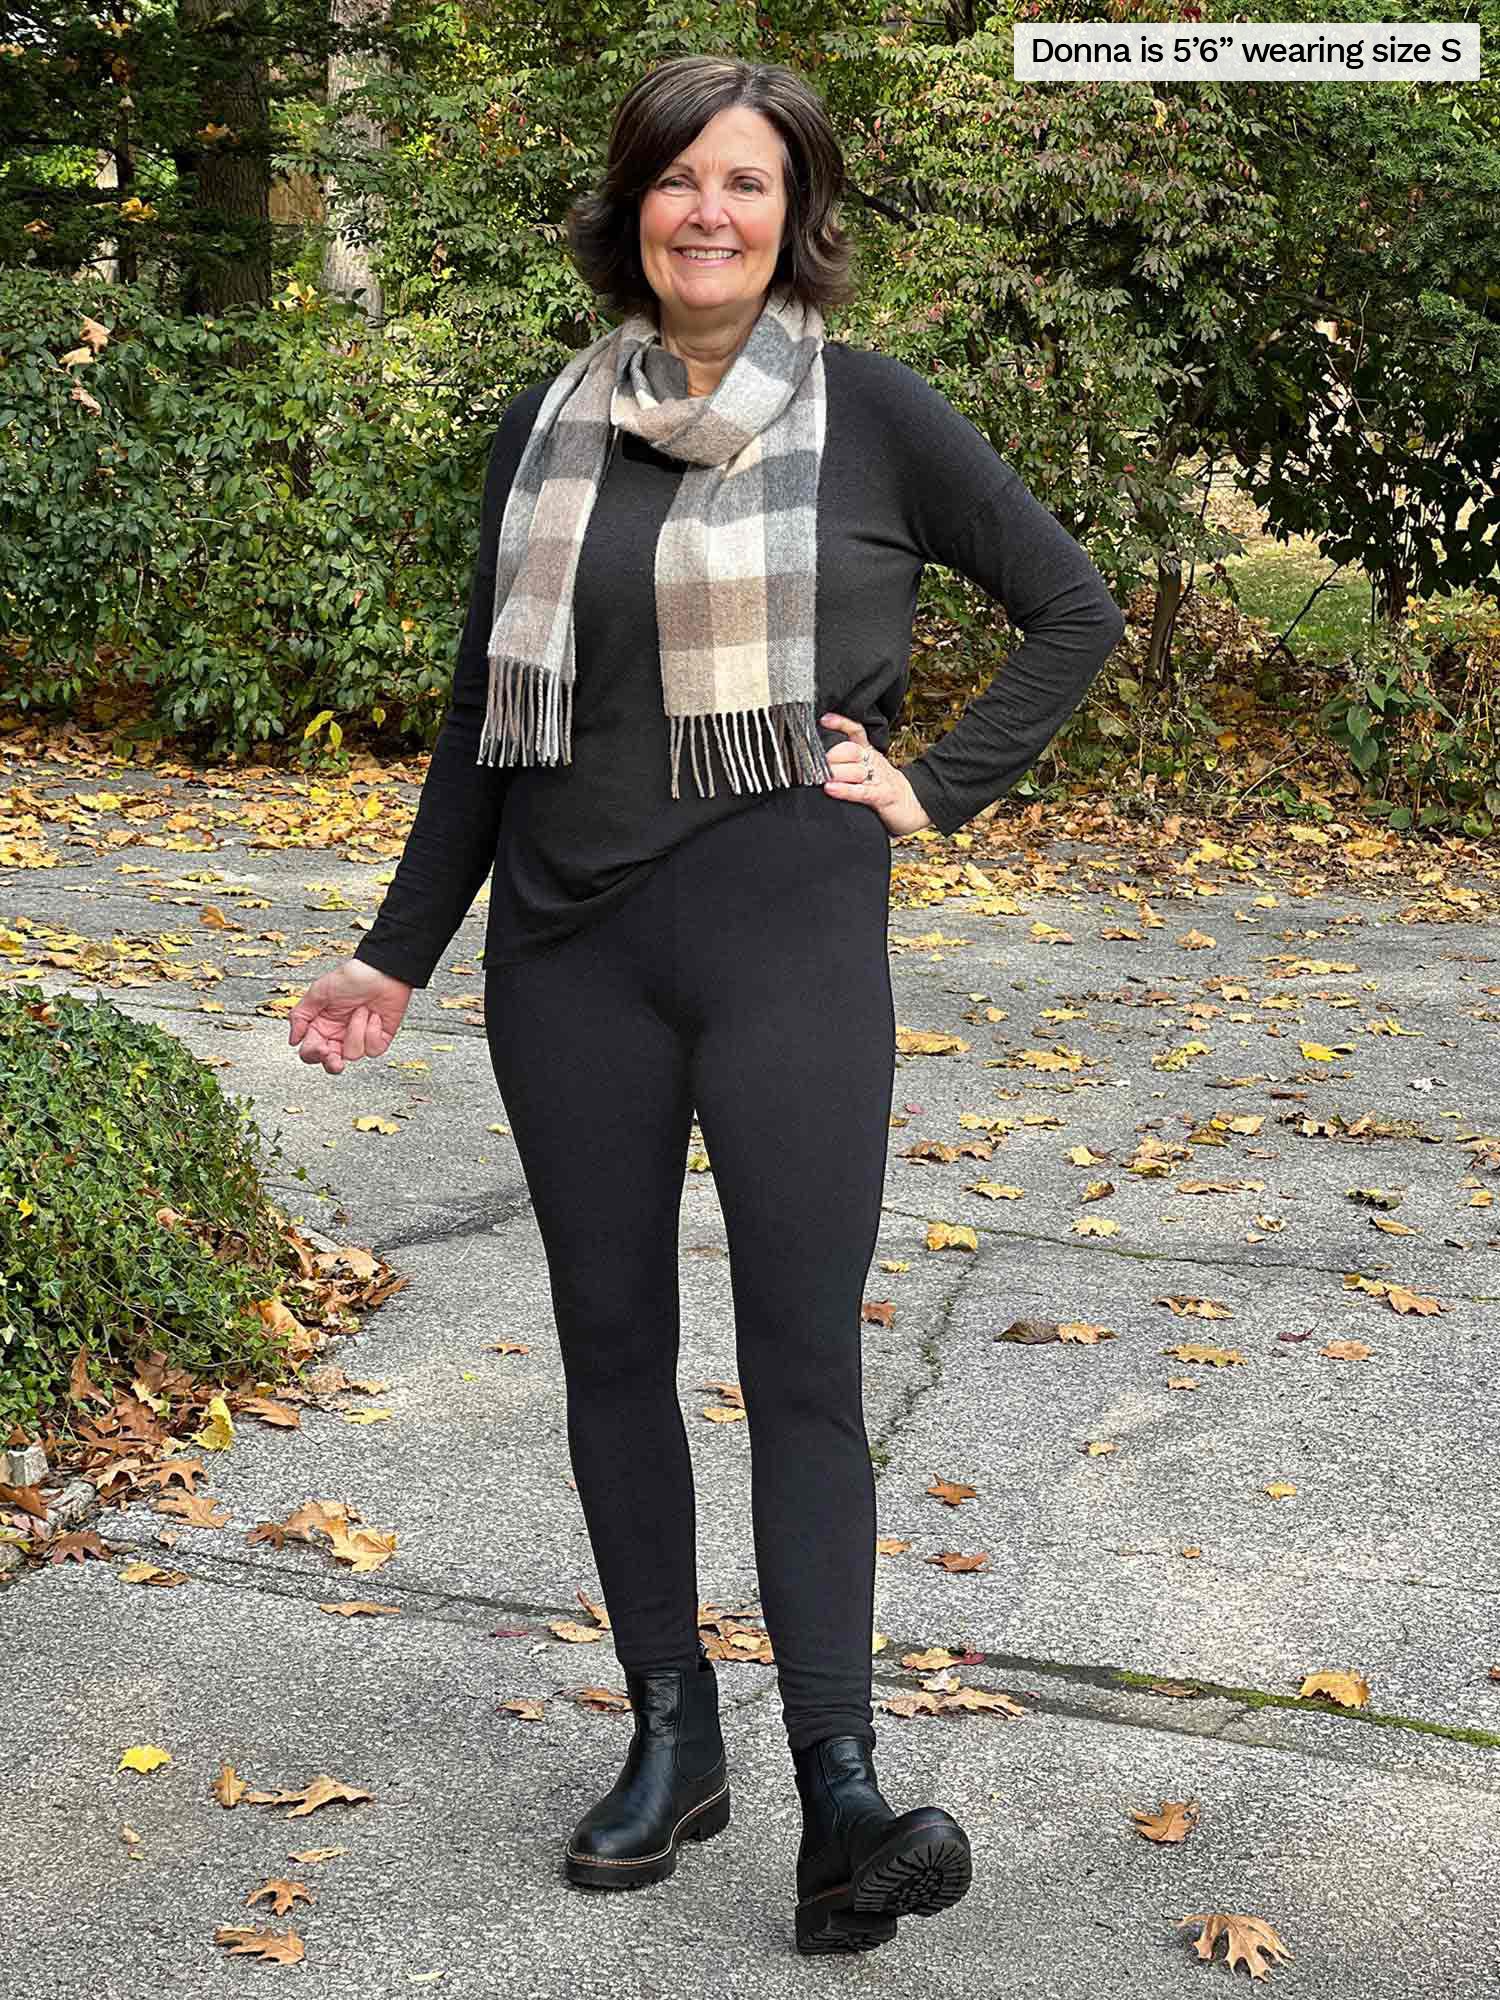 Buy Solid Mid-Rise Leggings with Elasticated Waistband and Cutout Detail